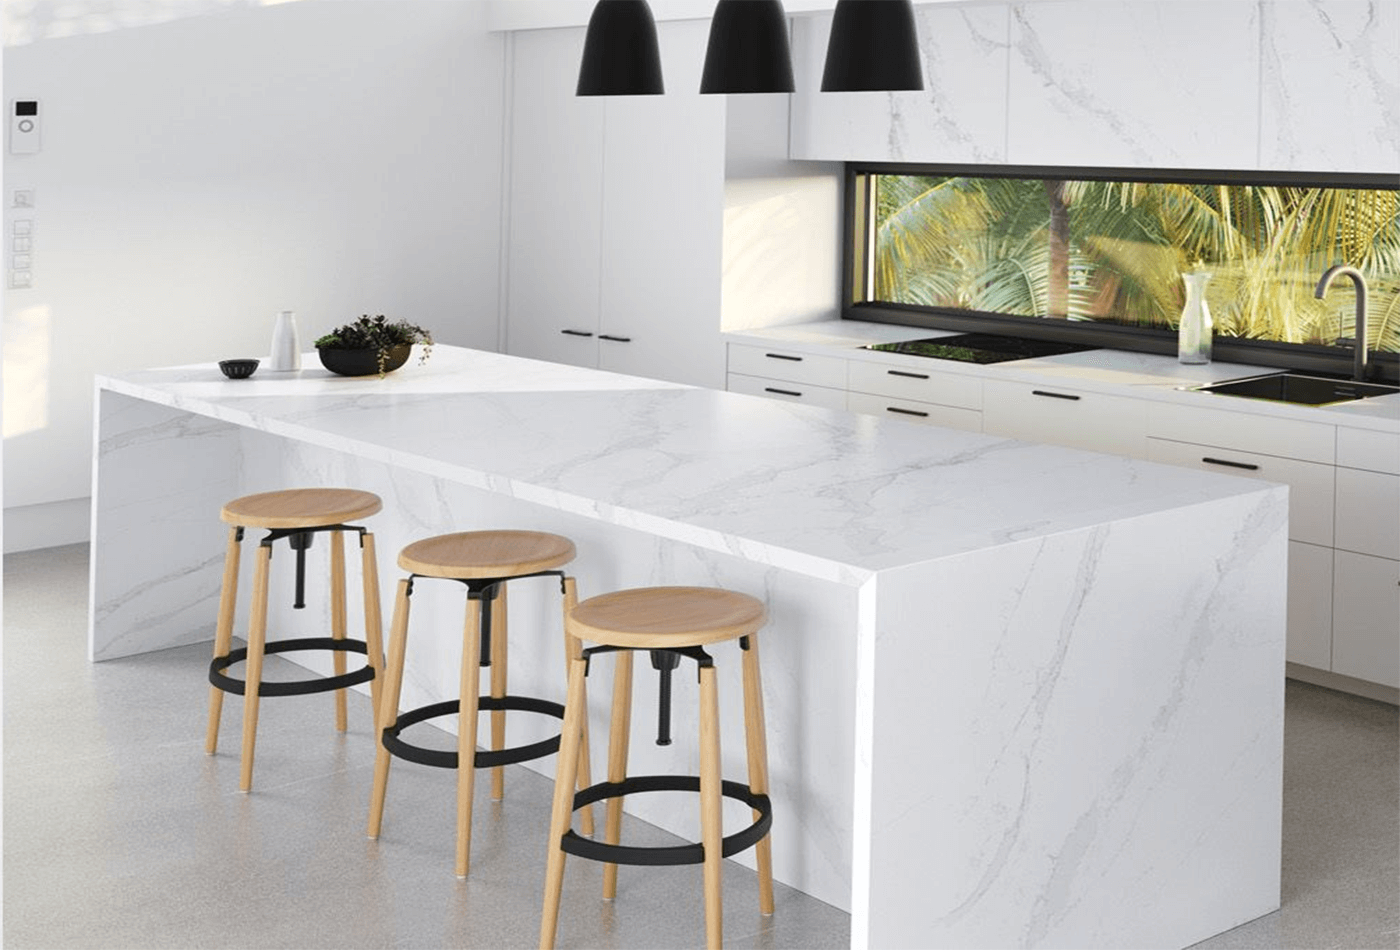 Et. Calacatta Gold Silestone﻿; Stay Trendy in this Winter